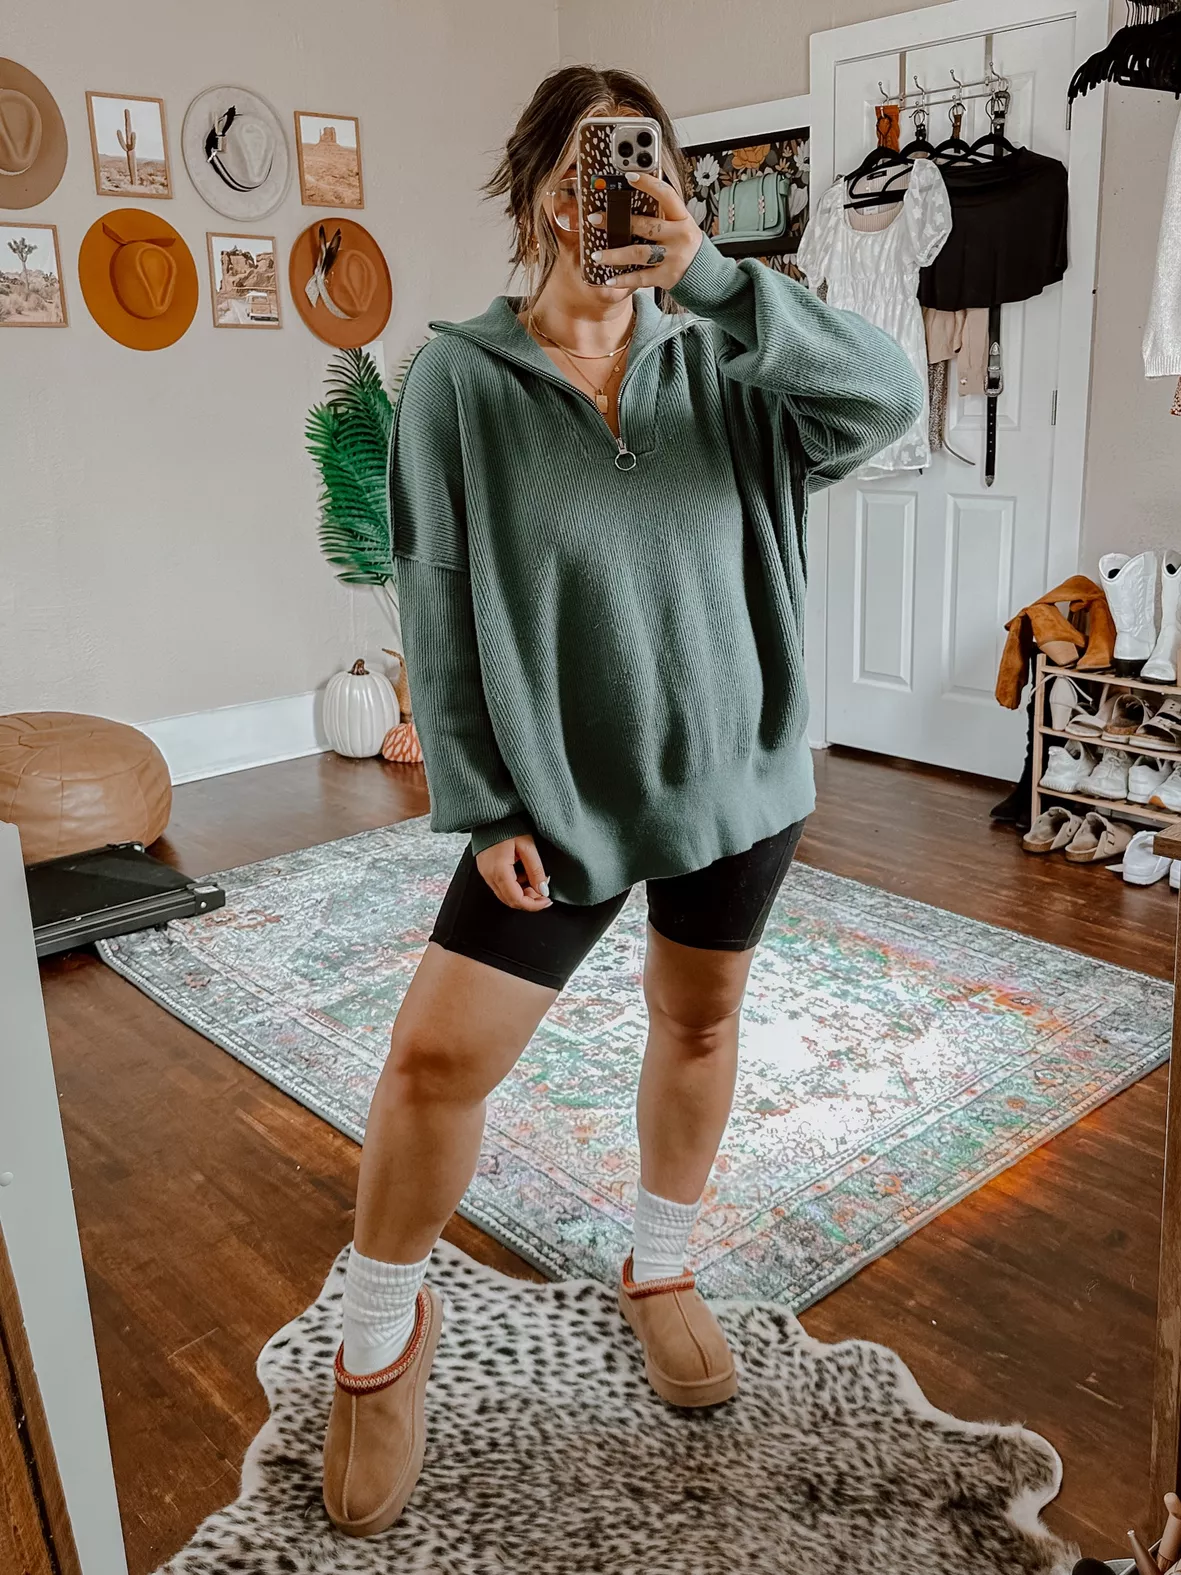 CASUAL OUTFIT IDEAS FOR LAZY DAYS!